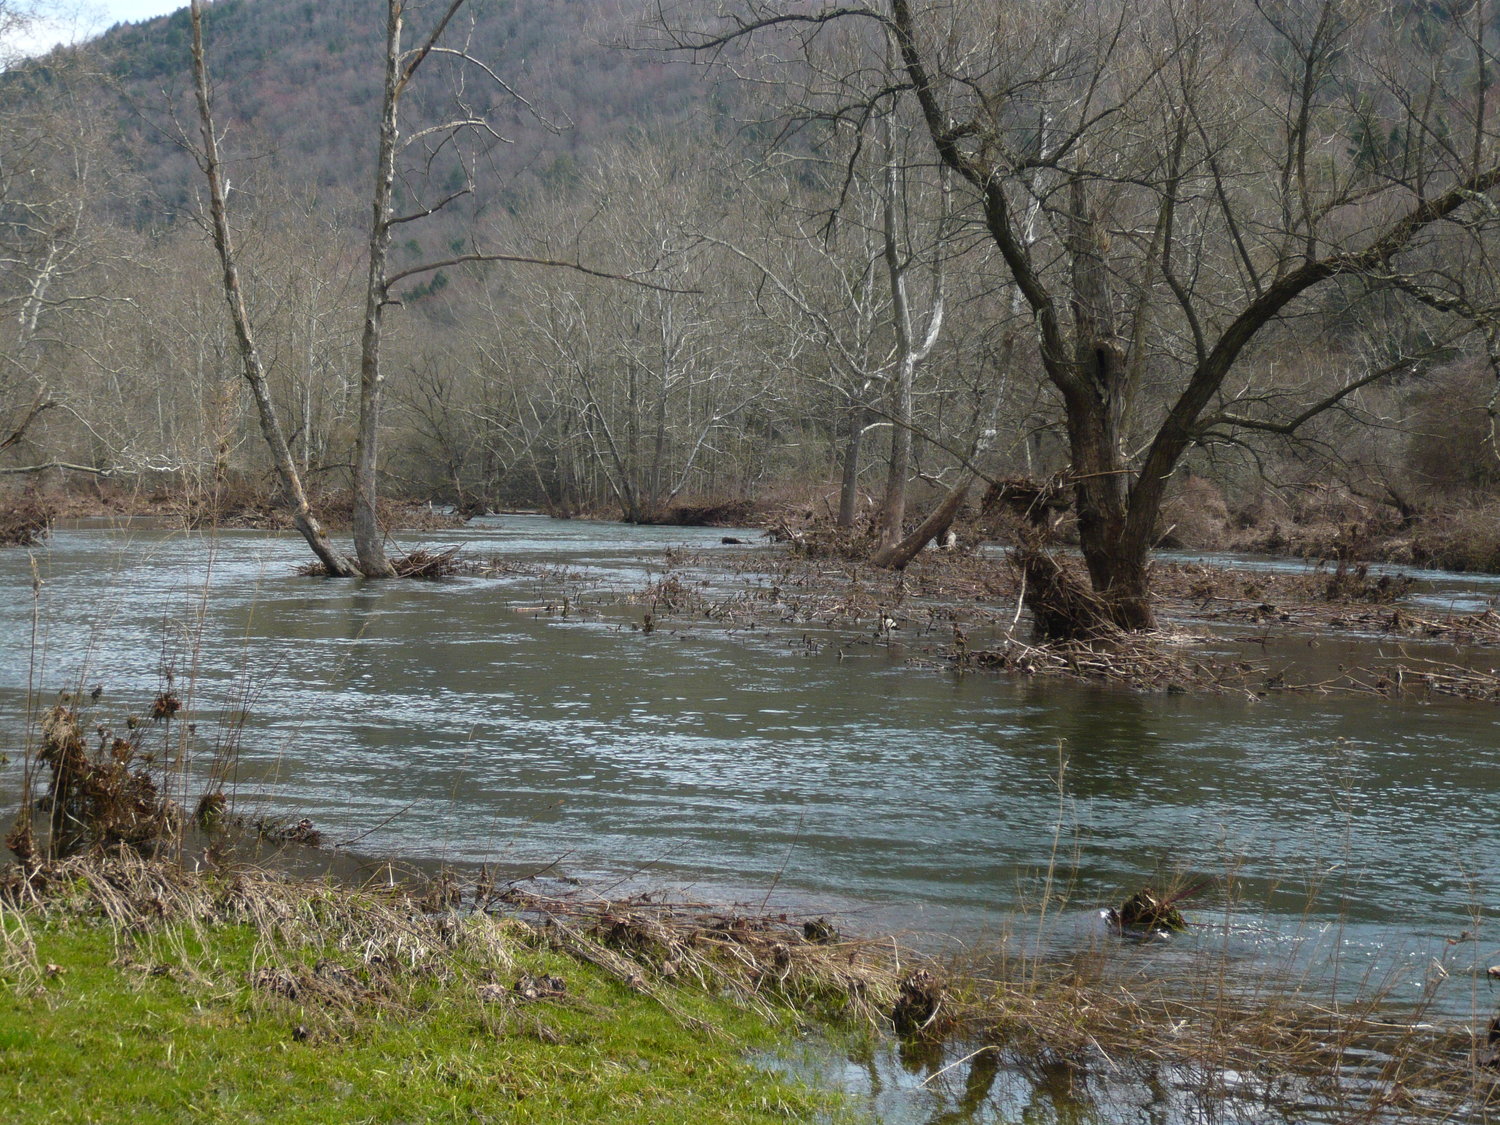 The East Branch of the Delaware, at 1,400 cfs, on April 14. Normal flow is 100 cfs.